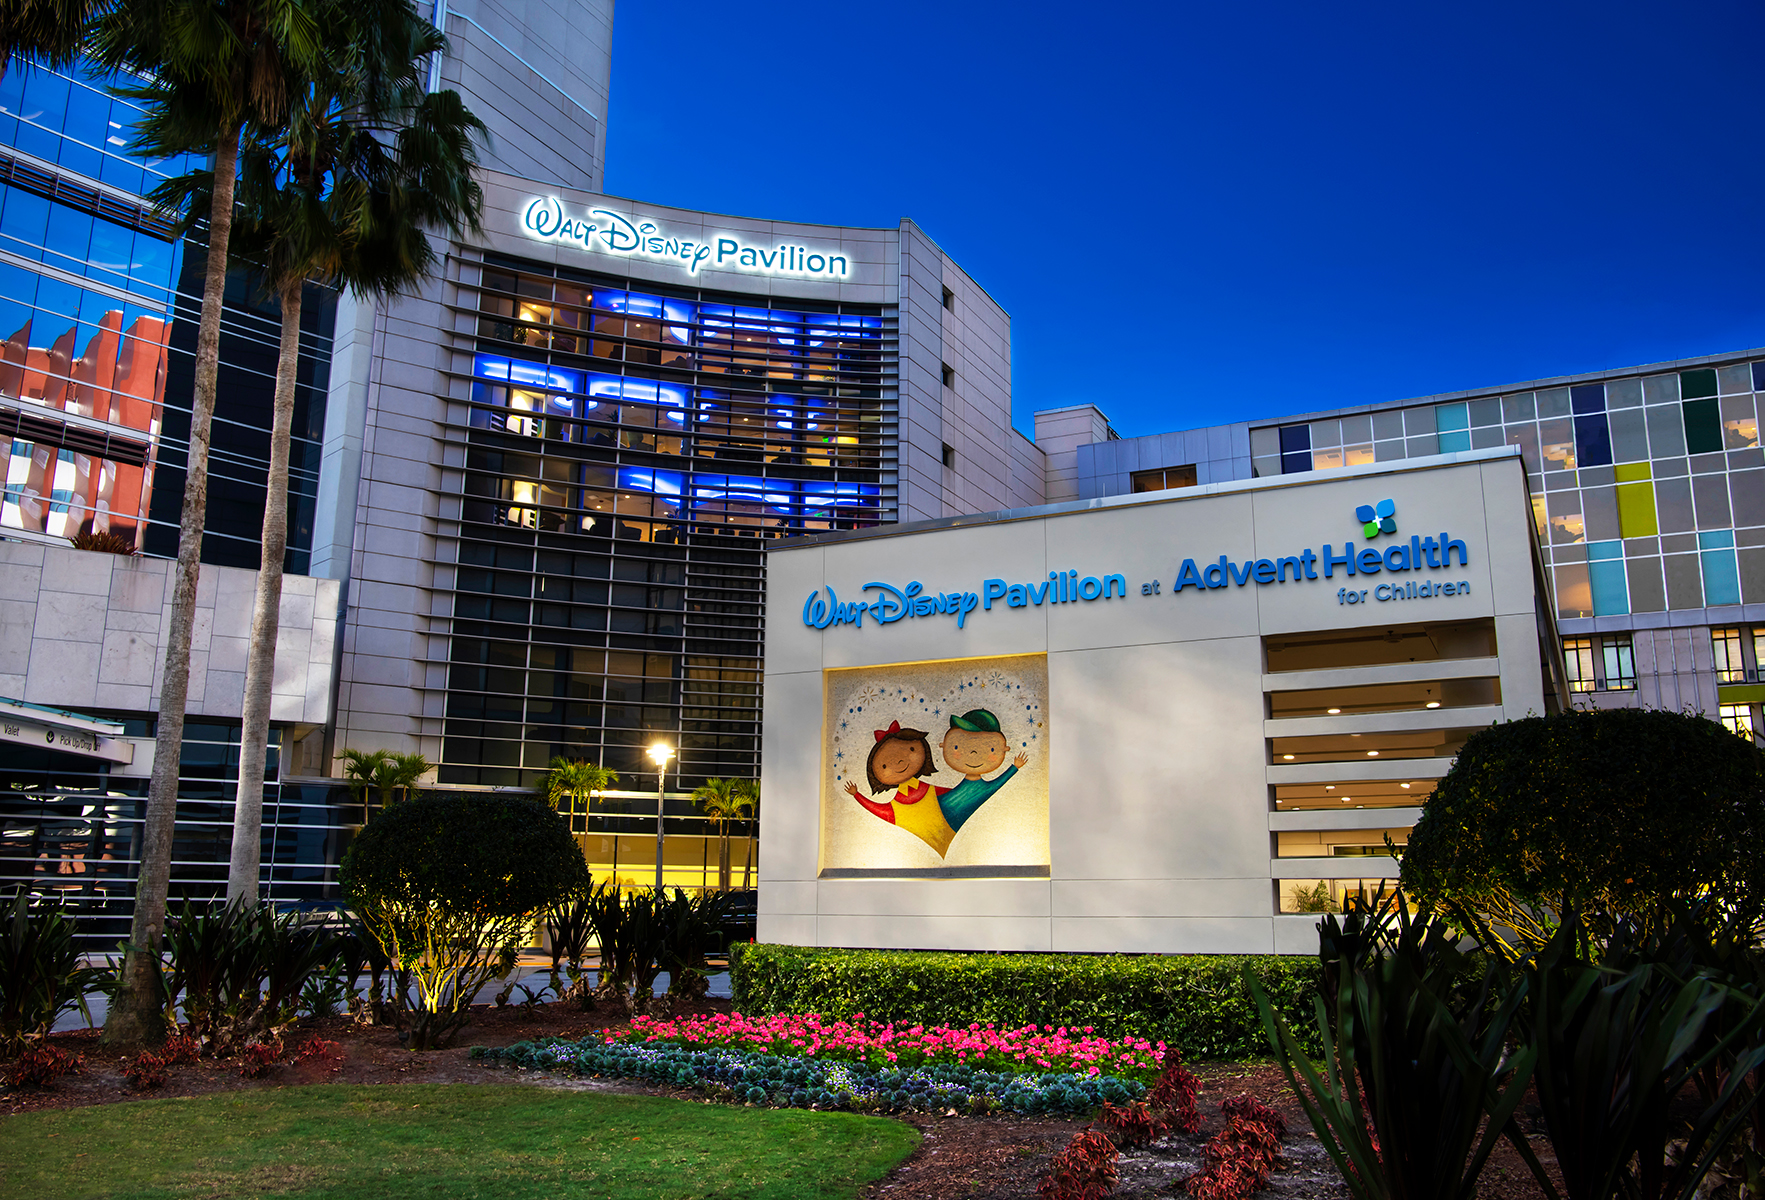 Photo of a building that says Walt Disney Pavillion at AdventHealth for Children